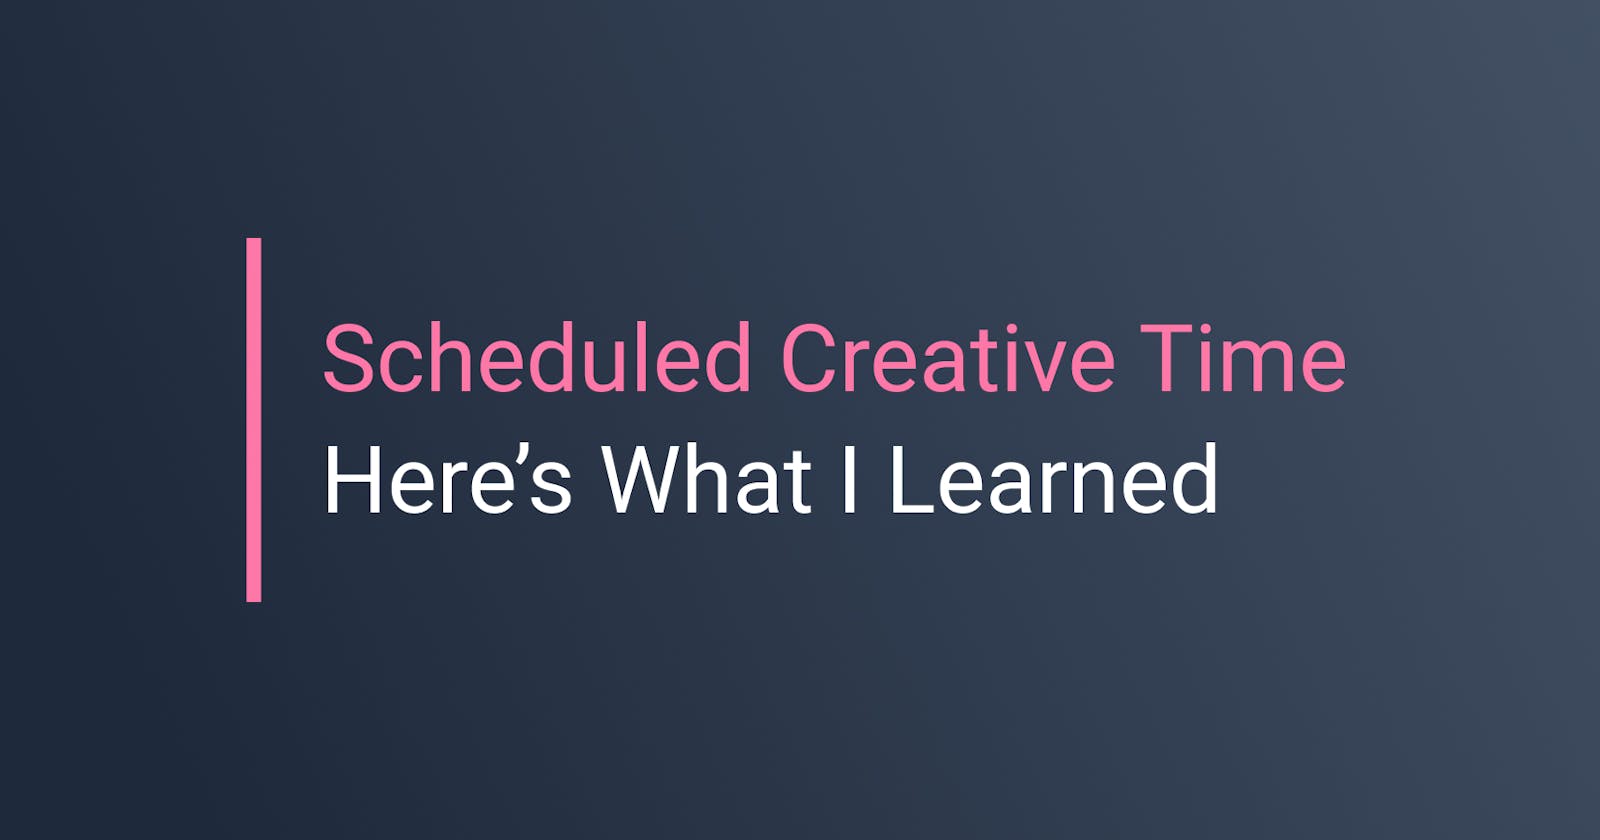 I Scheduled My Creative Time For The Last 4 Weeks, Here's What I Learned